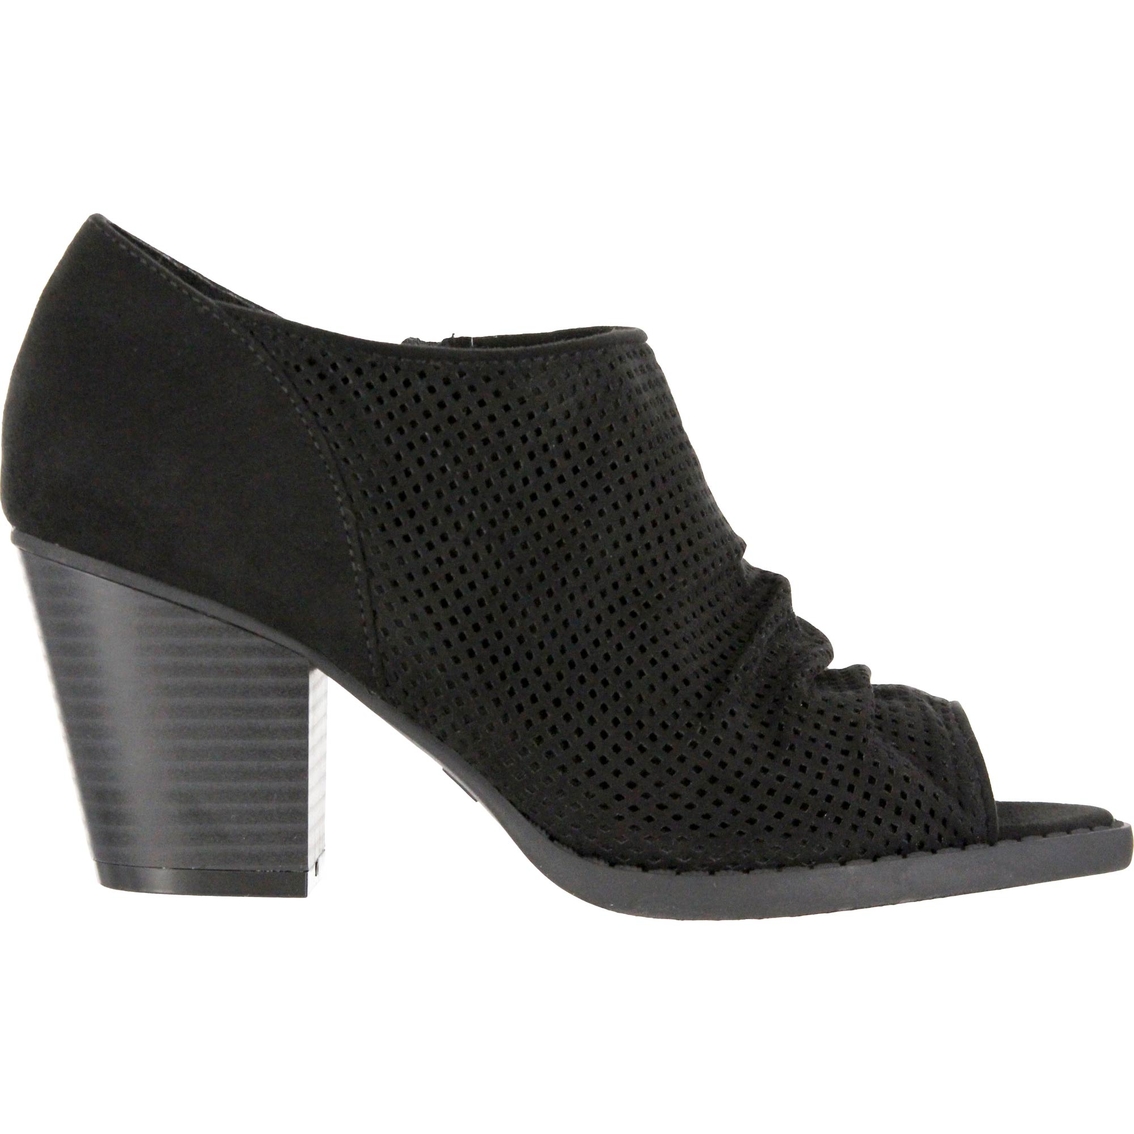 Mia Shoes Portia Perforated Peep Toe Booties | Booties | Shoes | Shop ...